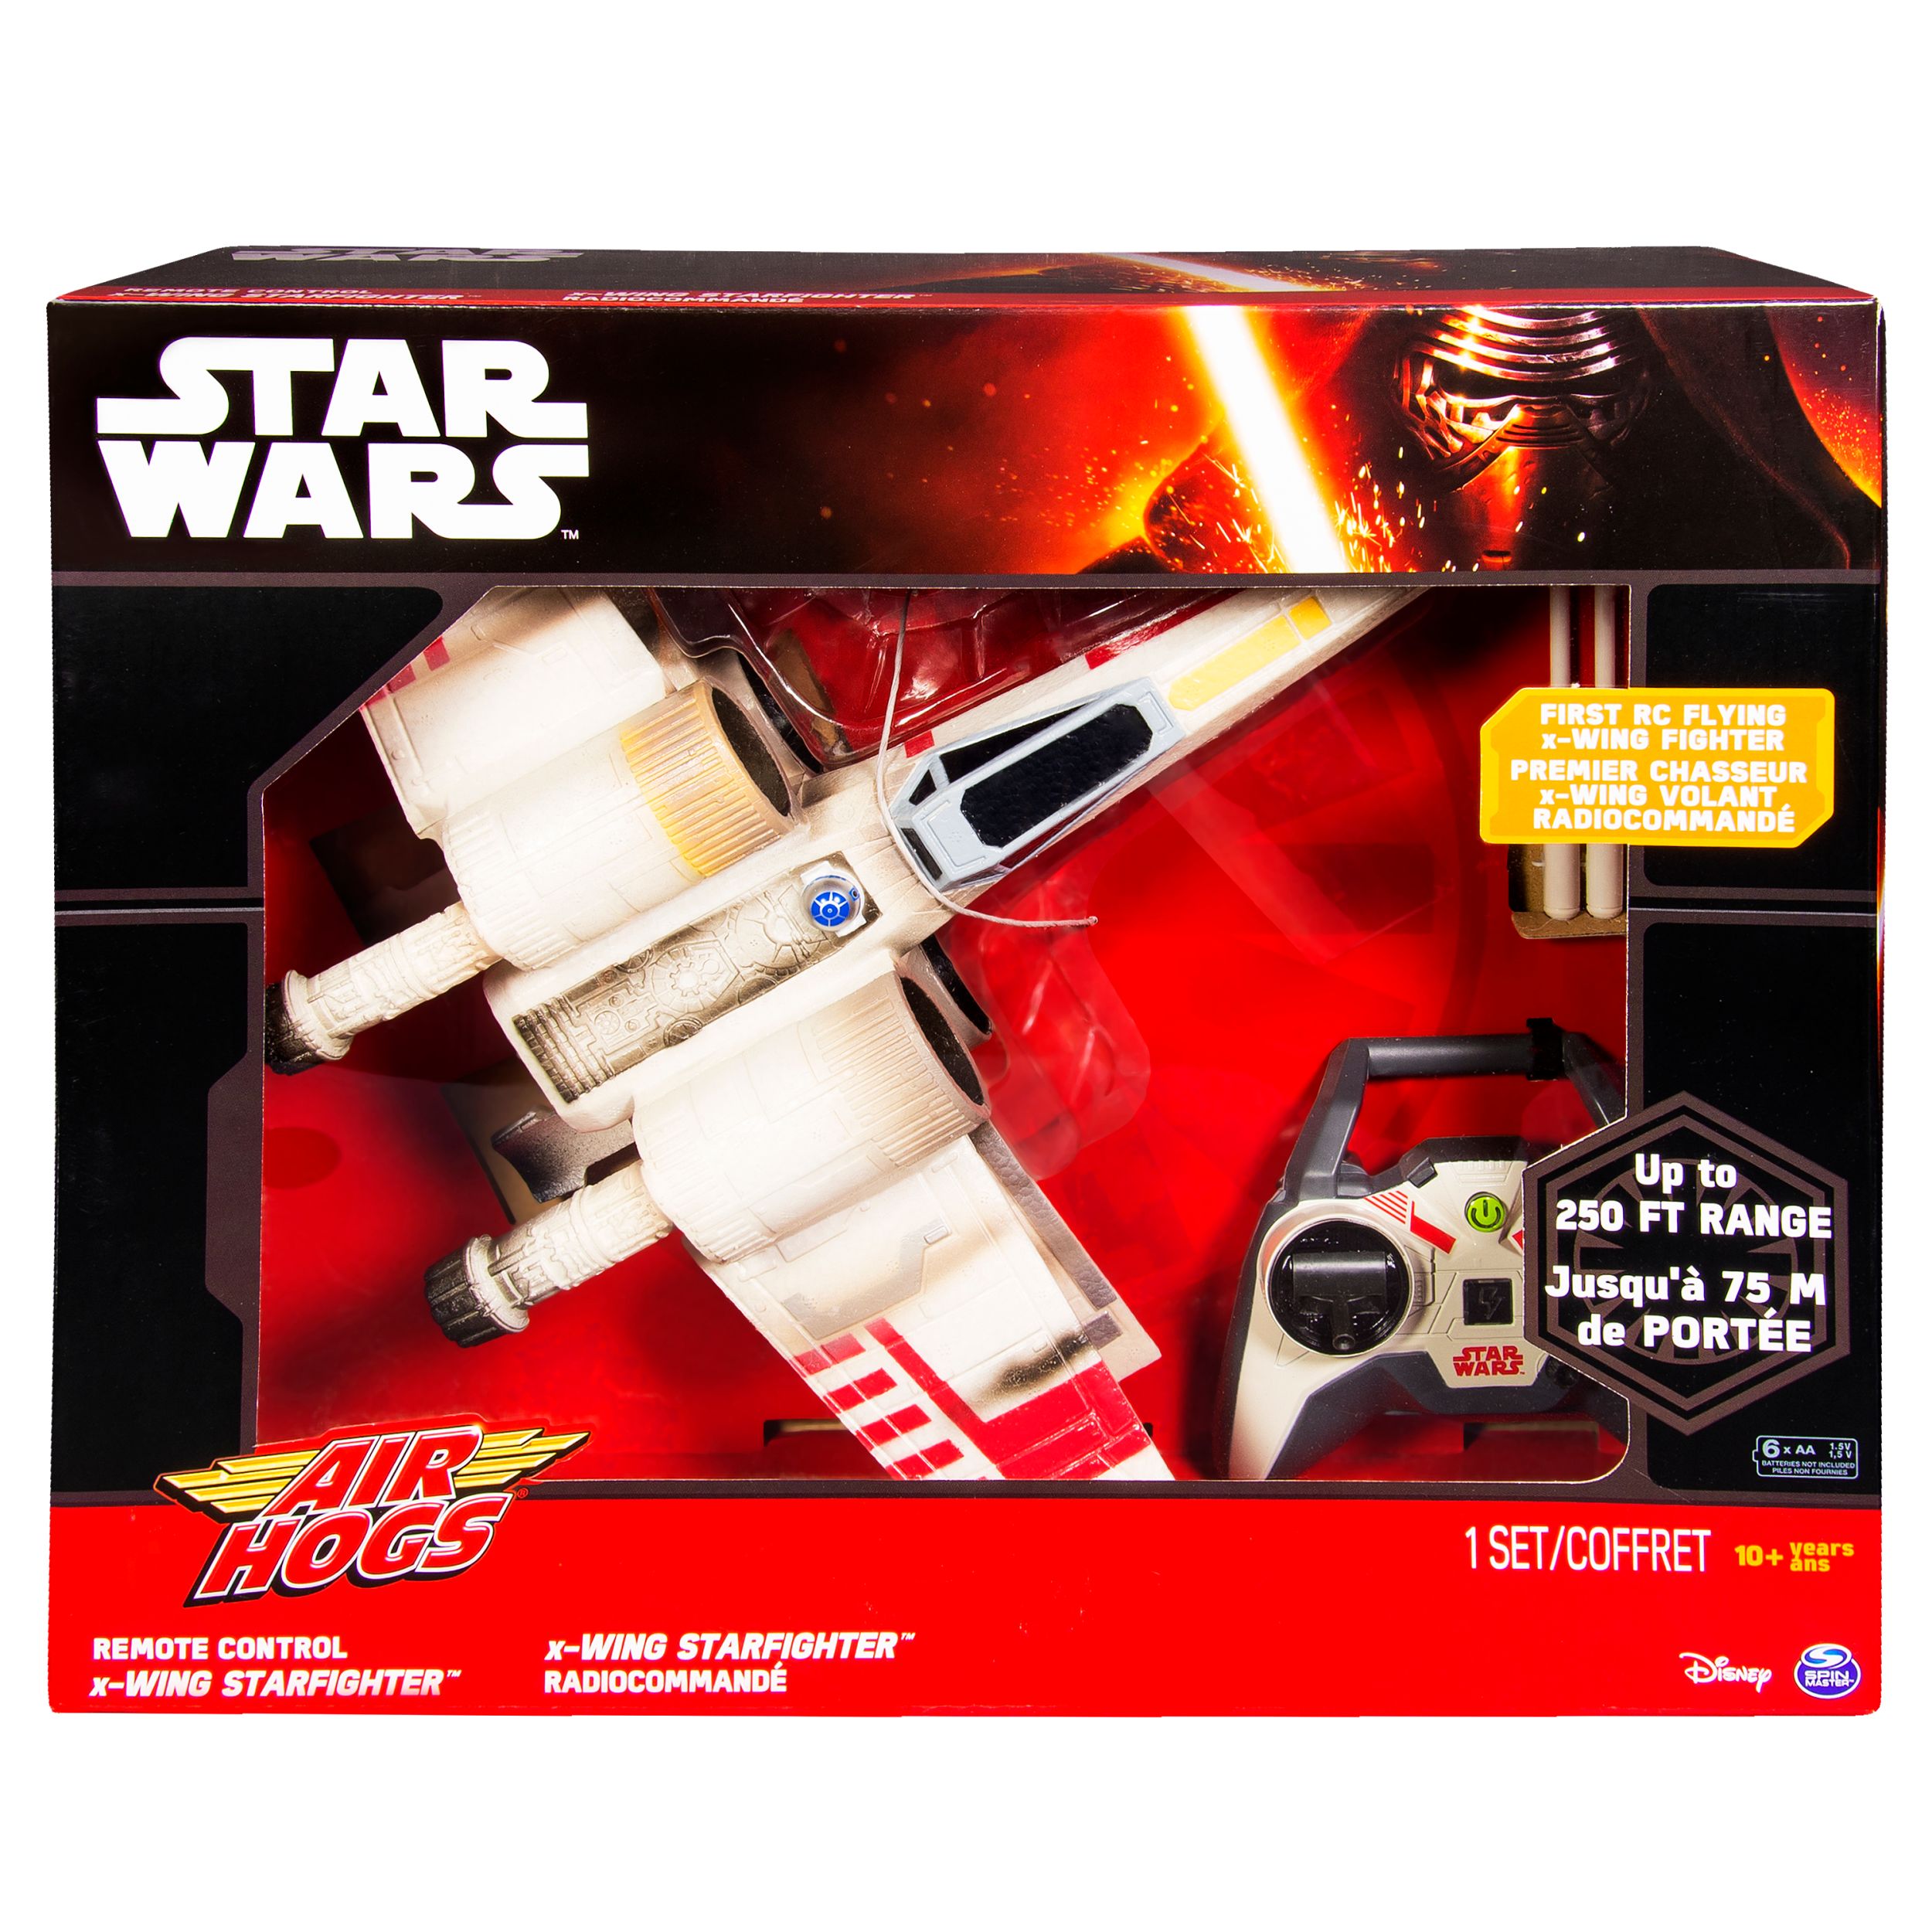 Air Hogs Star Wars Remote Control X-Wing Starfighter - image 2 of 6